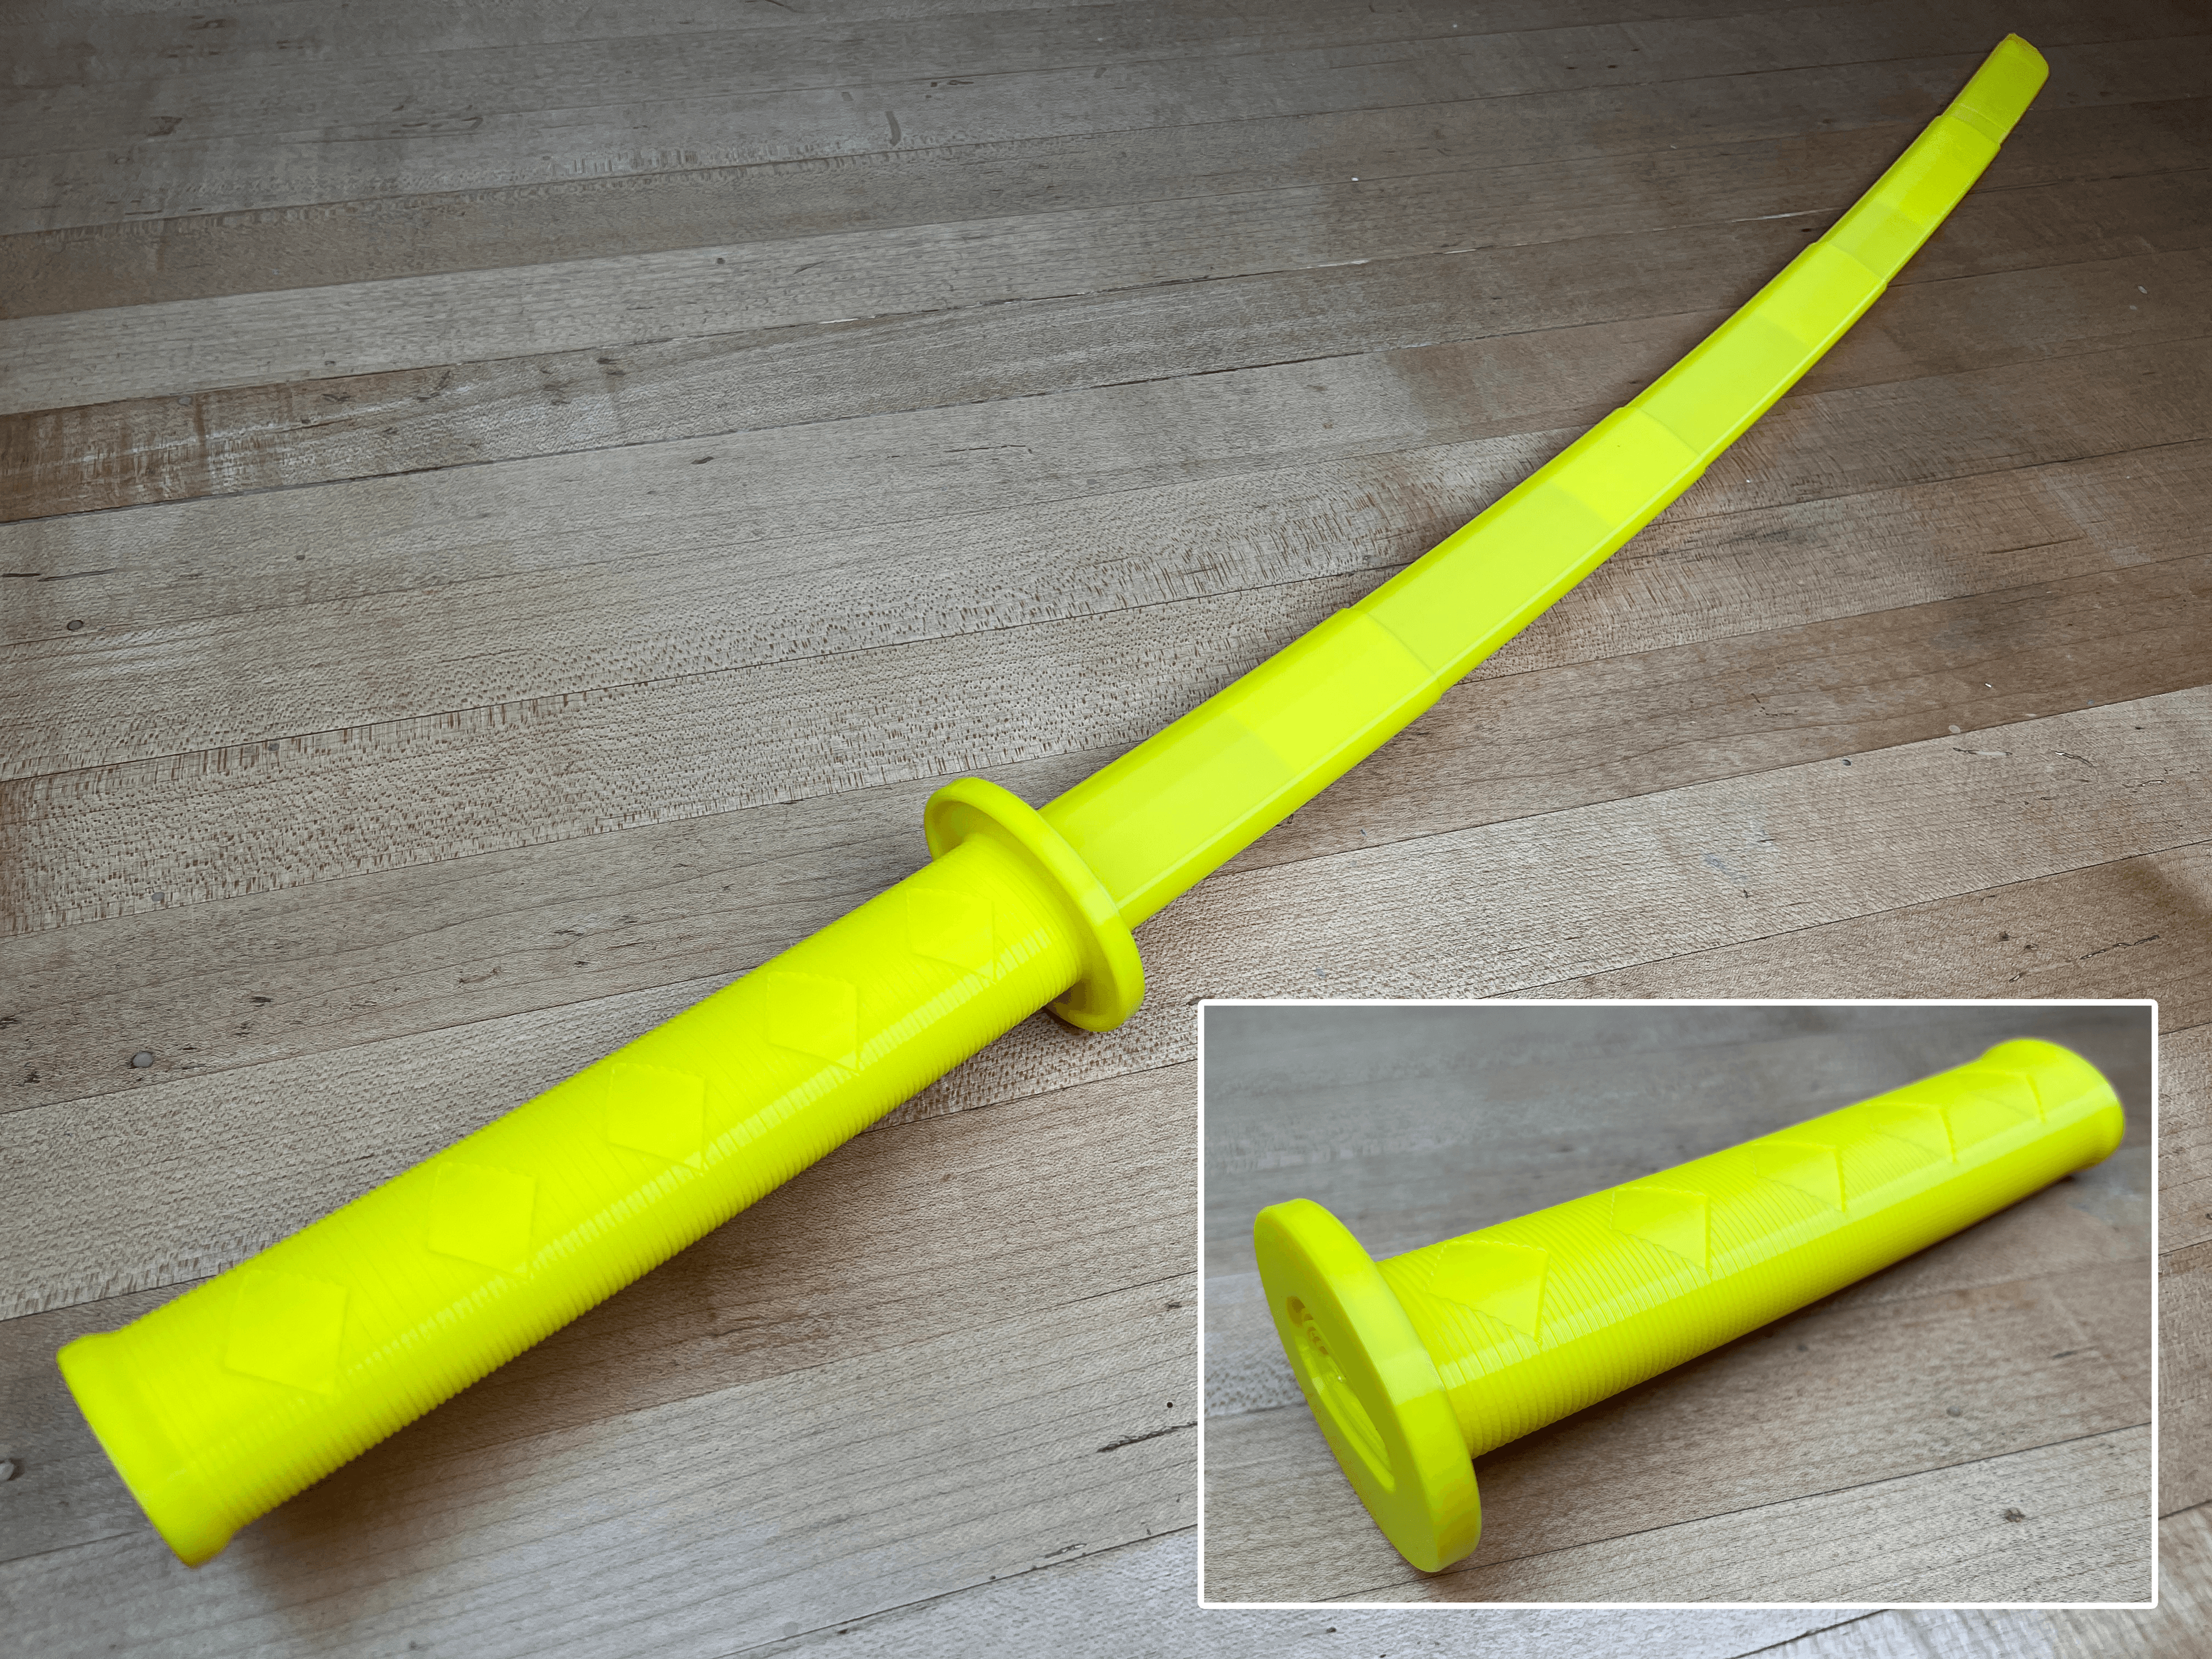 Collapsing Katana Print-In-Place 3d model